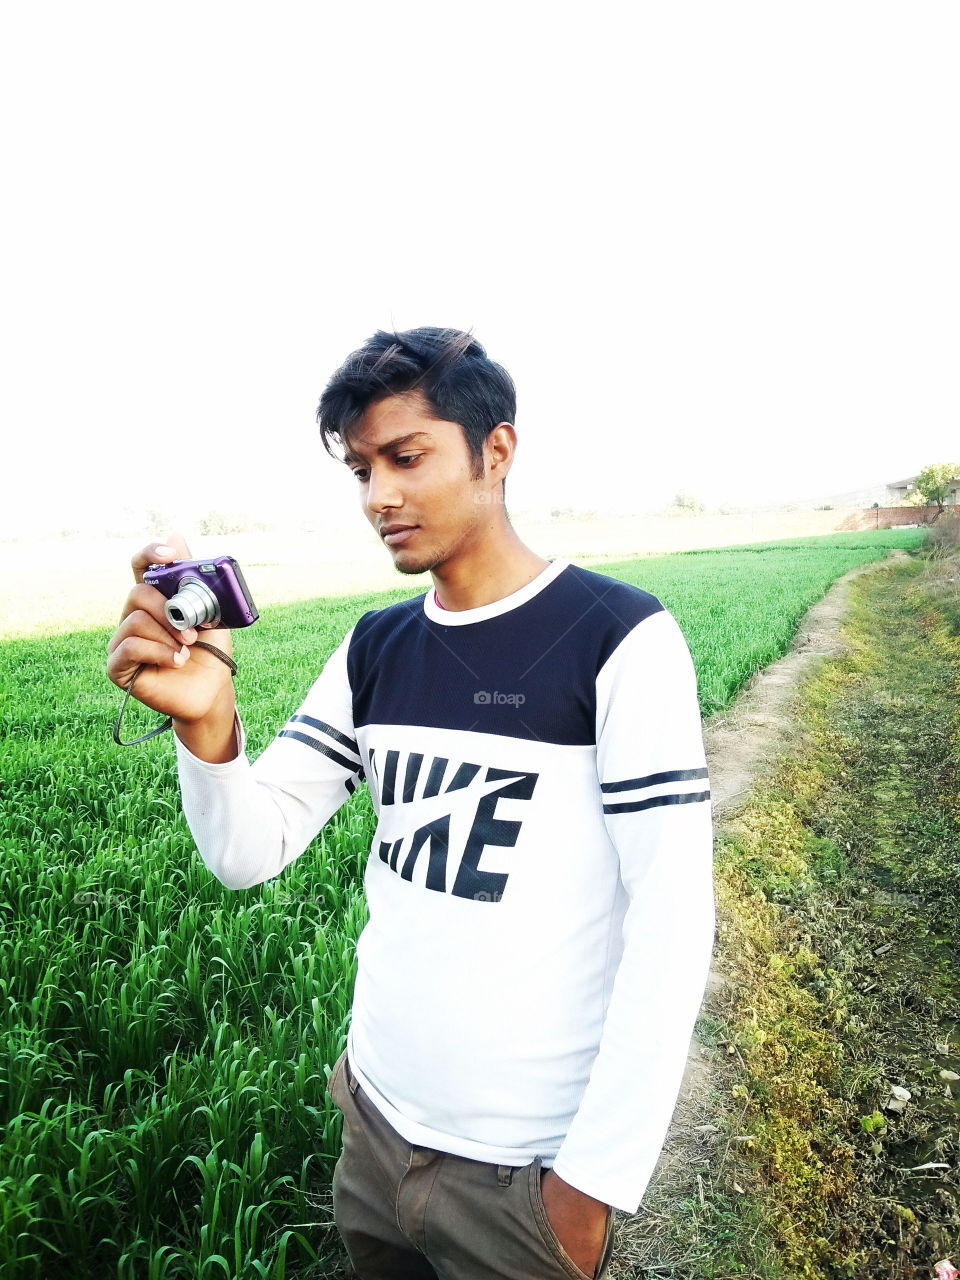 me and my camera